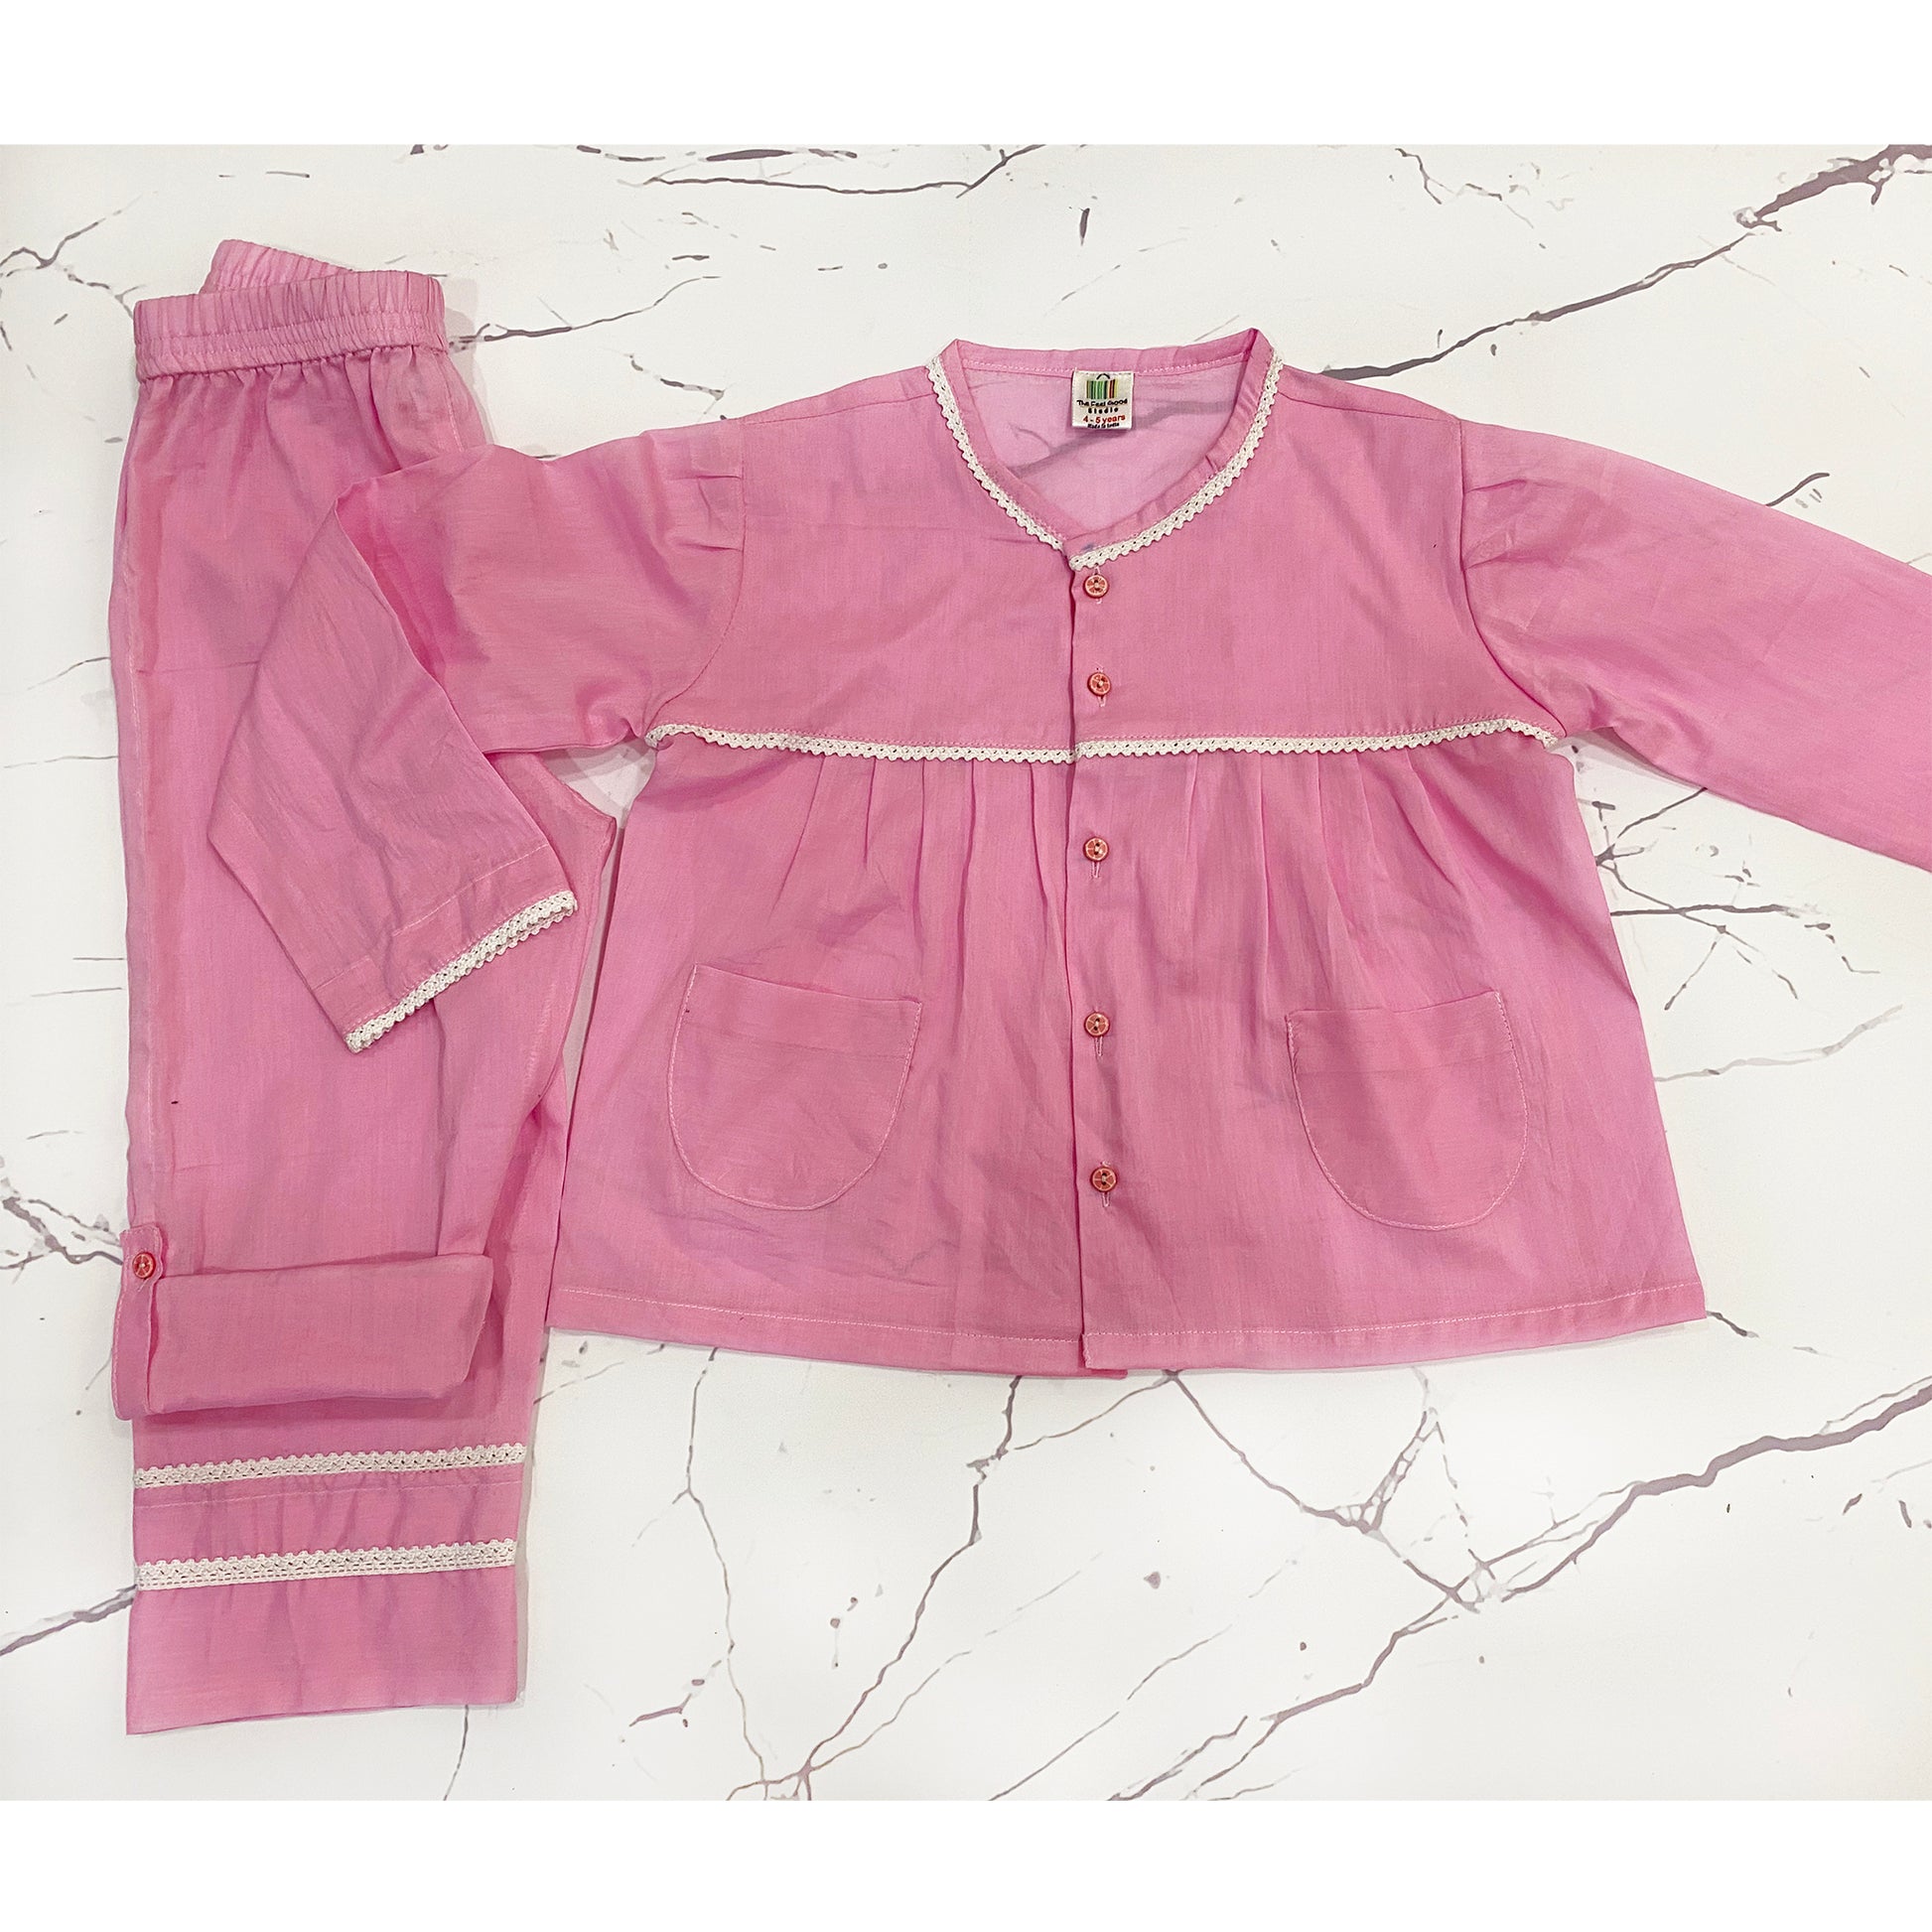 cotton-mul-night-suit-for-babies